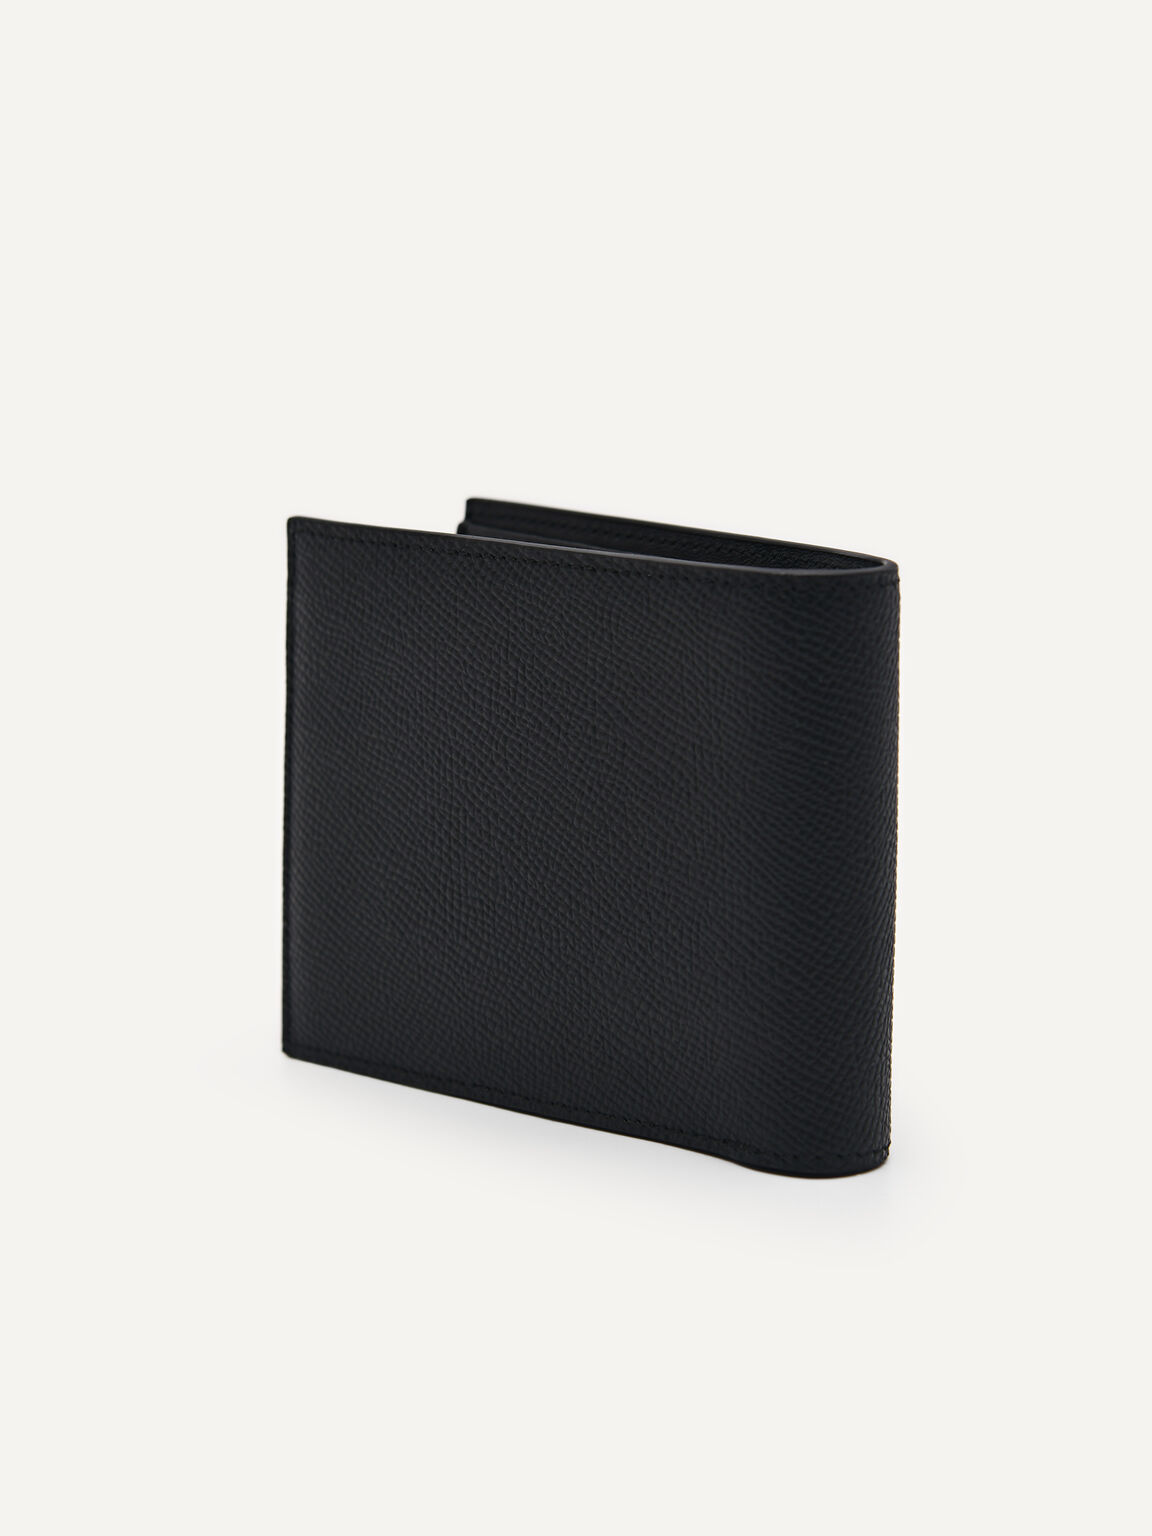 PEDRO Icon Leather Bi-Fold Wallet with Insert, Black, hi-res